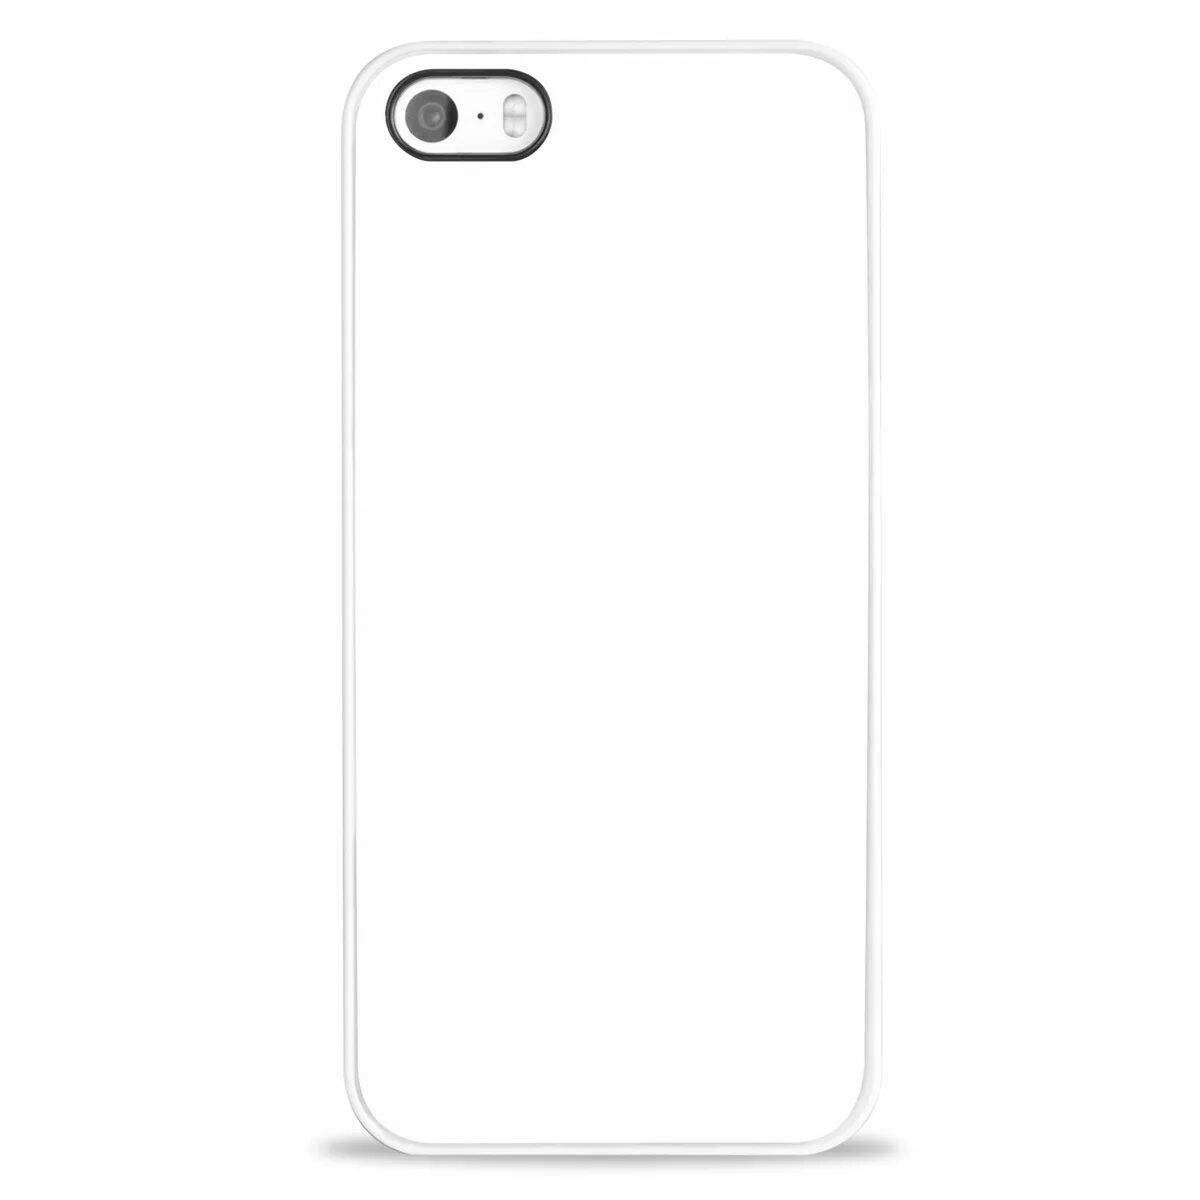 Color-lively iphone case coloring